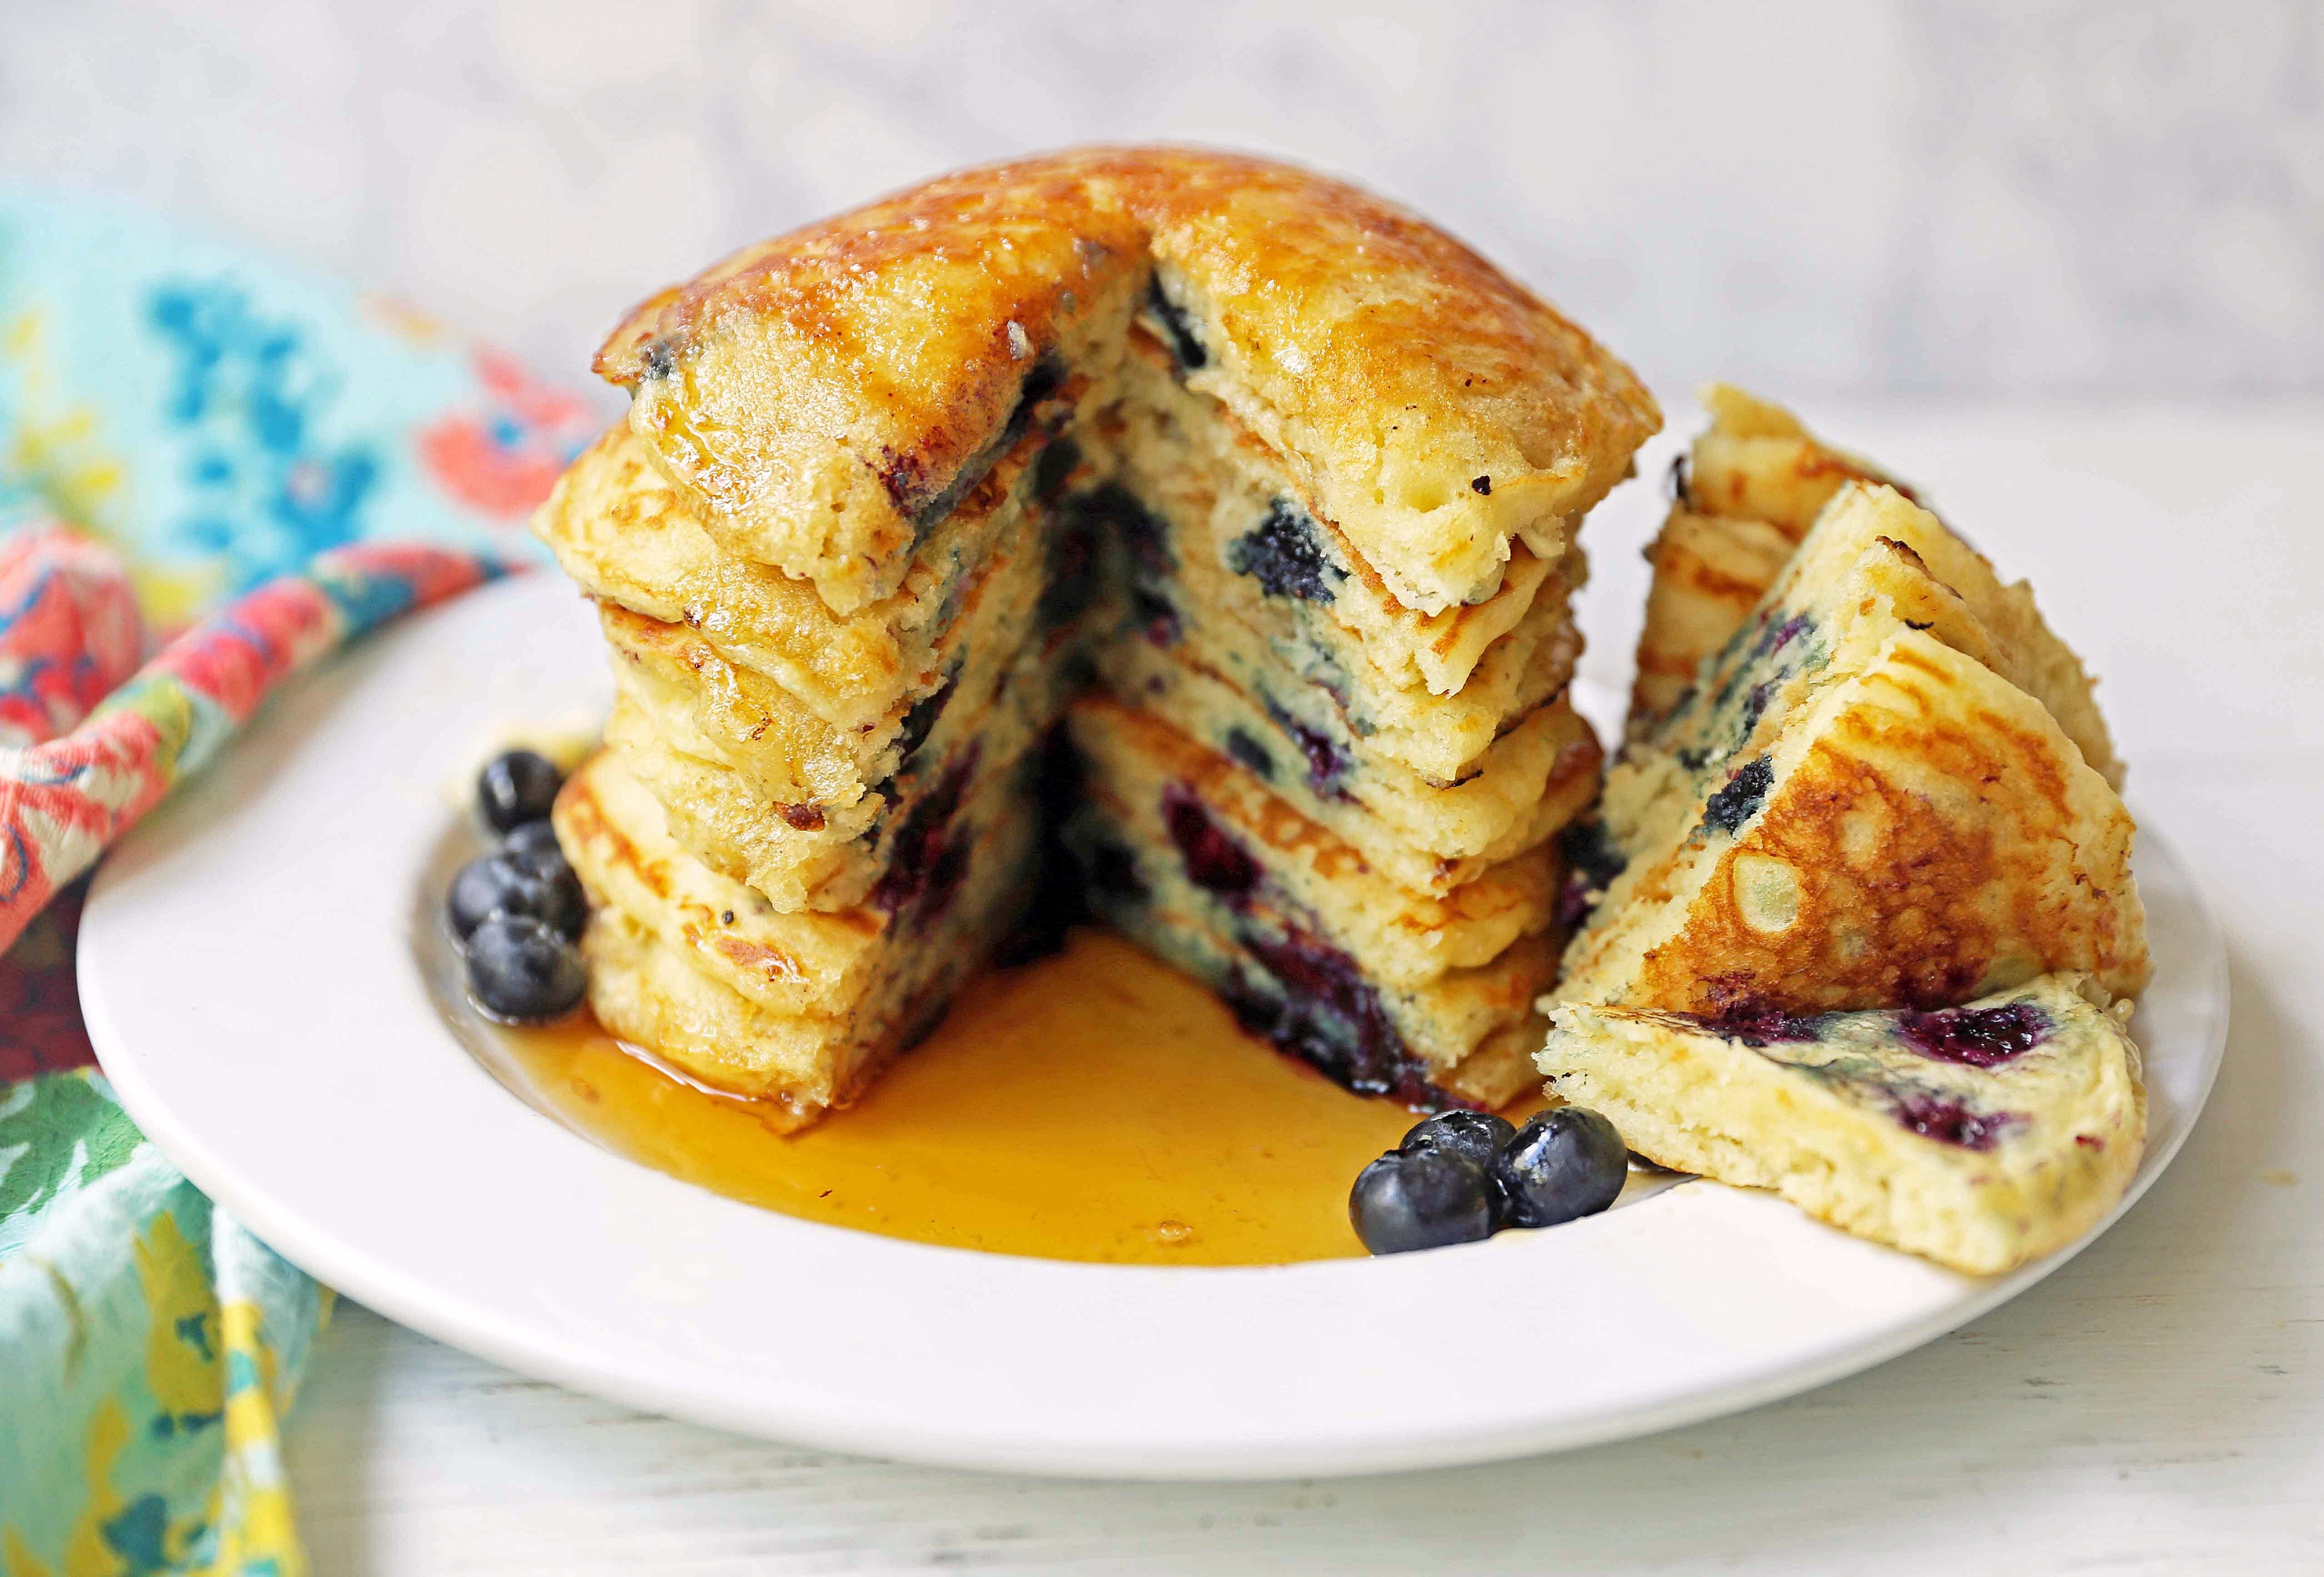 Homemade Blueberry Buttermilk Pancakes are light and fluffy. How to make the perfect blueberry pancakes. Tips and tricks for making the best blueberry pancakes. www.modernhoney.com #blueberrypancakes #blueberrybuttermilkpancakes #pancakes #pancakerecipes 